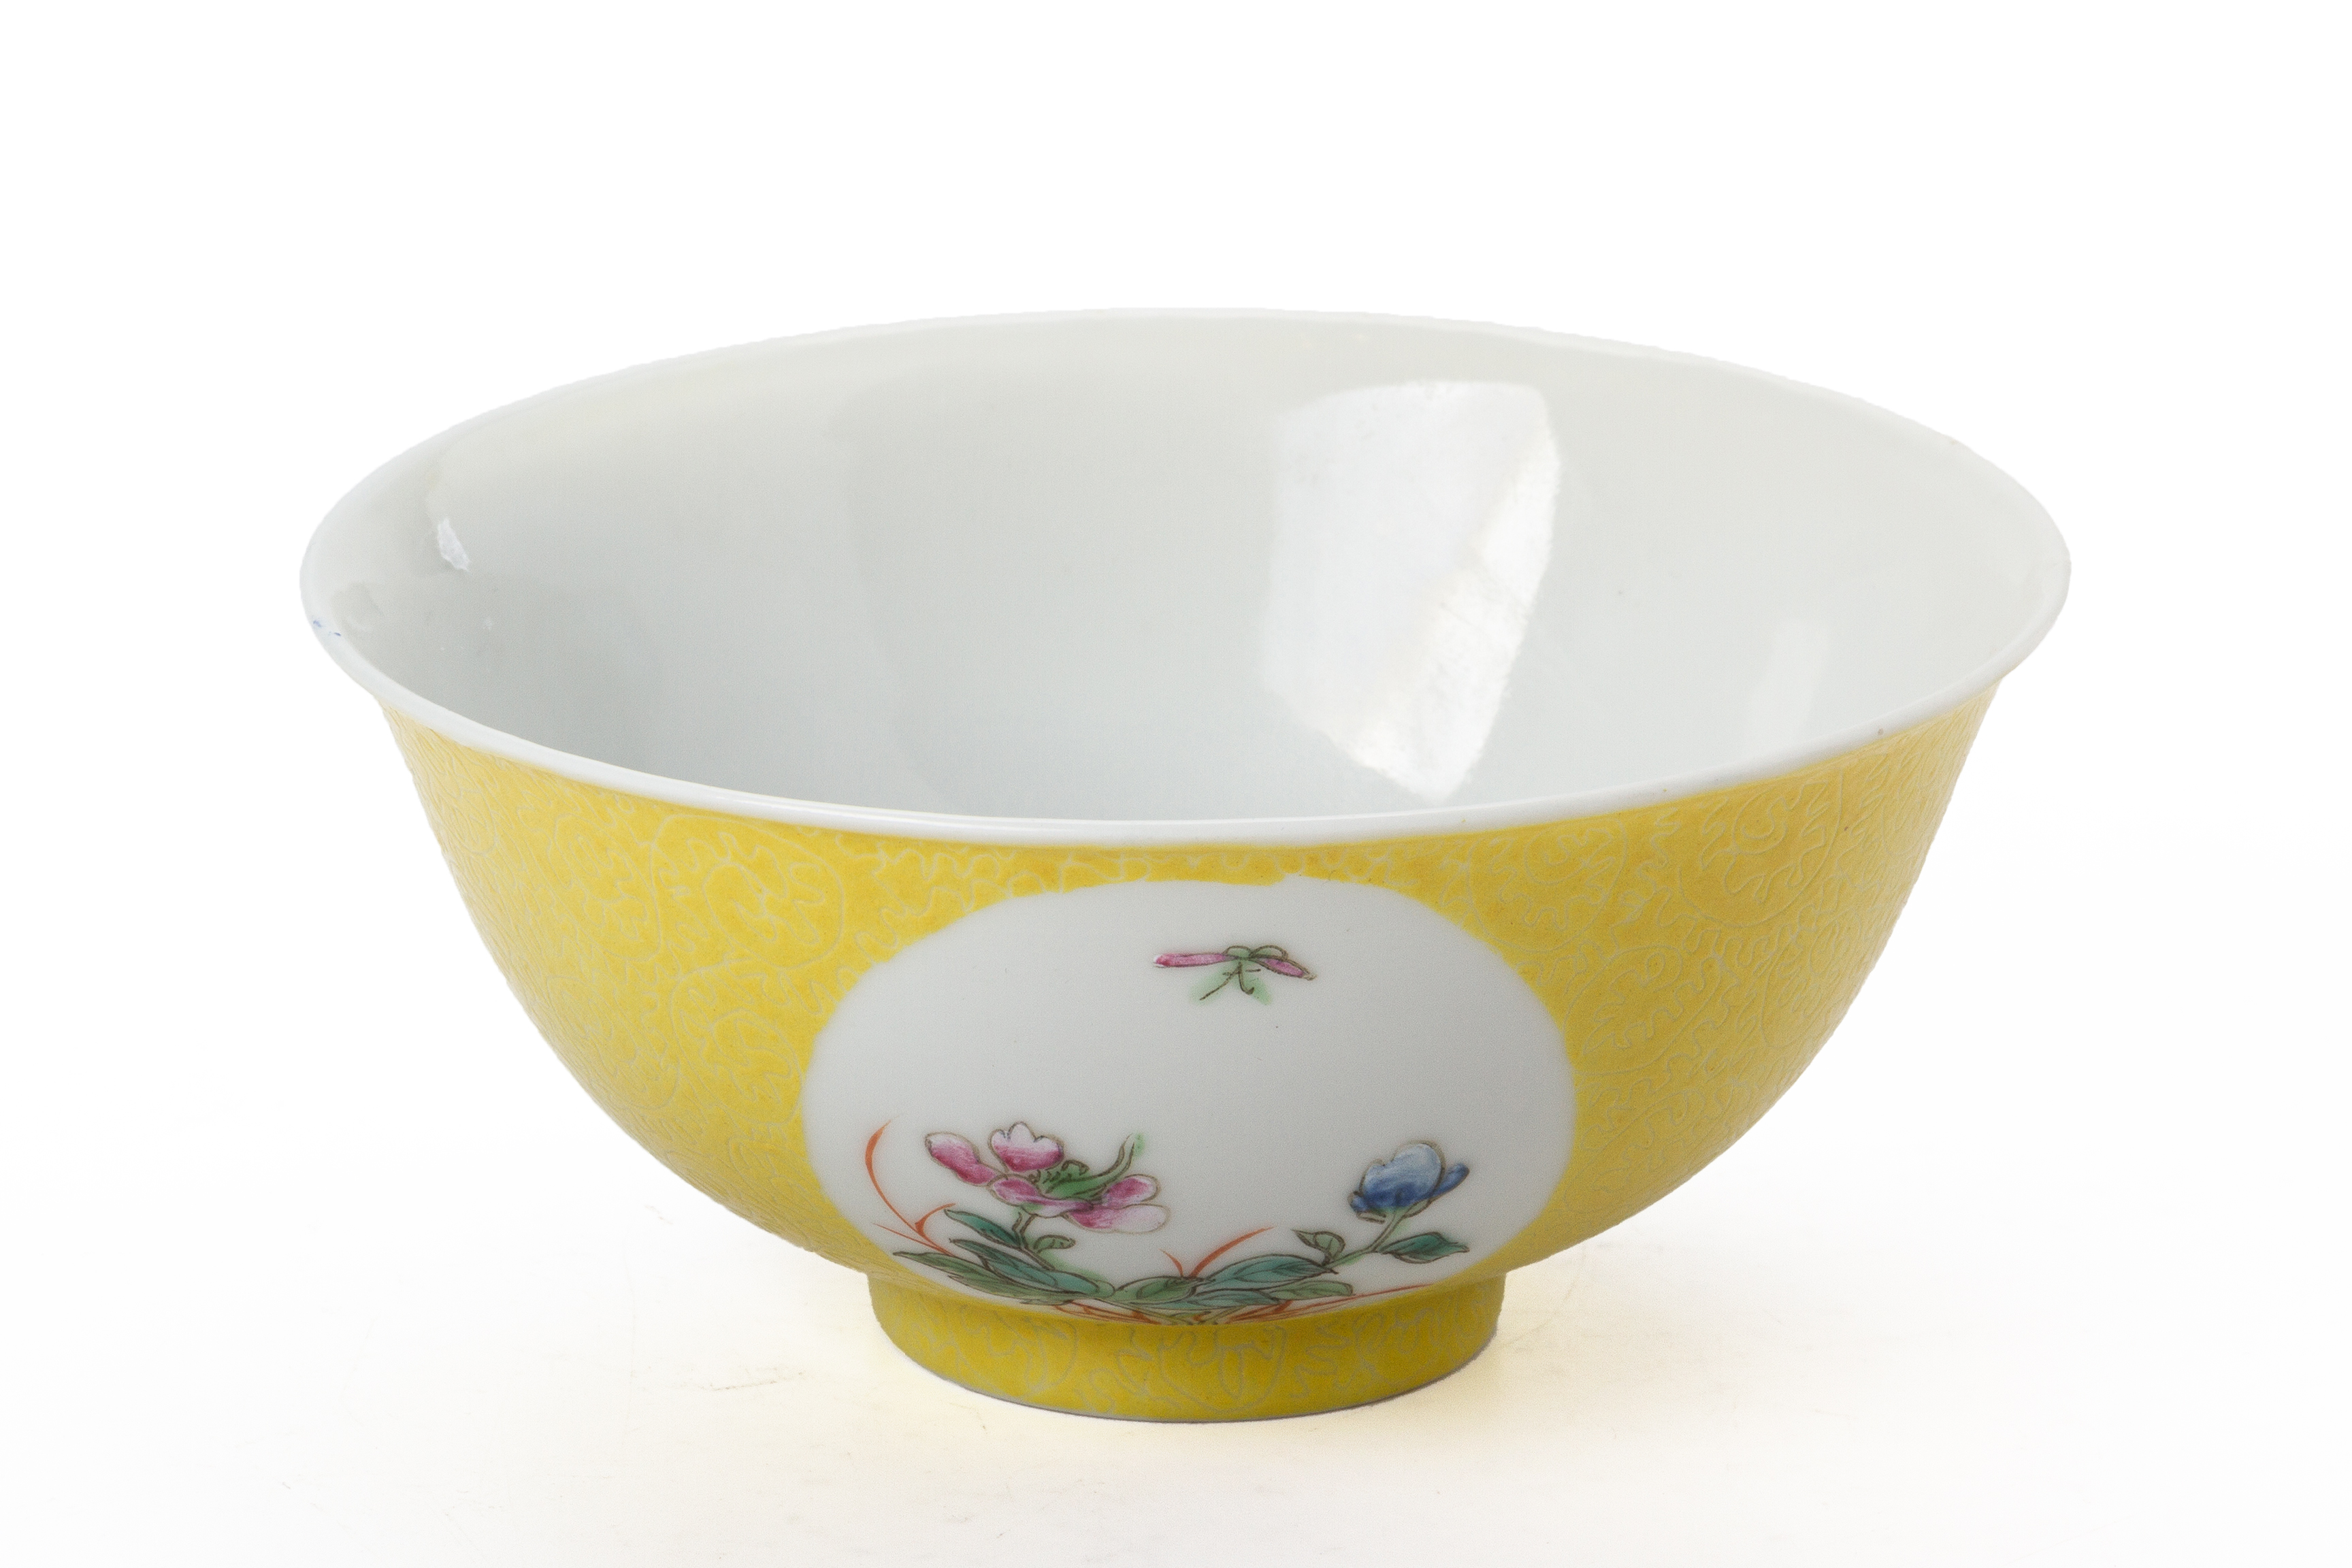 A FAMILLE ROSE YELLOW SGRAFFITO GROUND FLOWER MEDALLION BOWL - Image 3 of 3